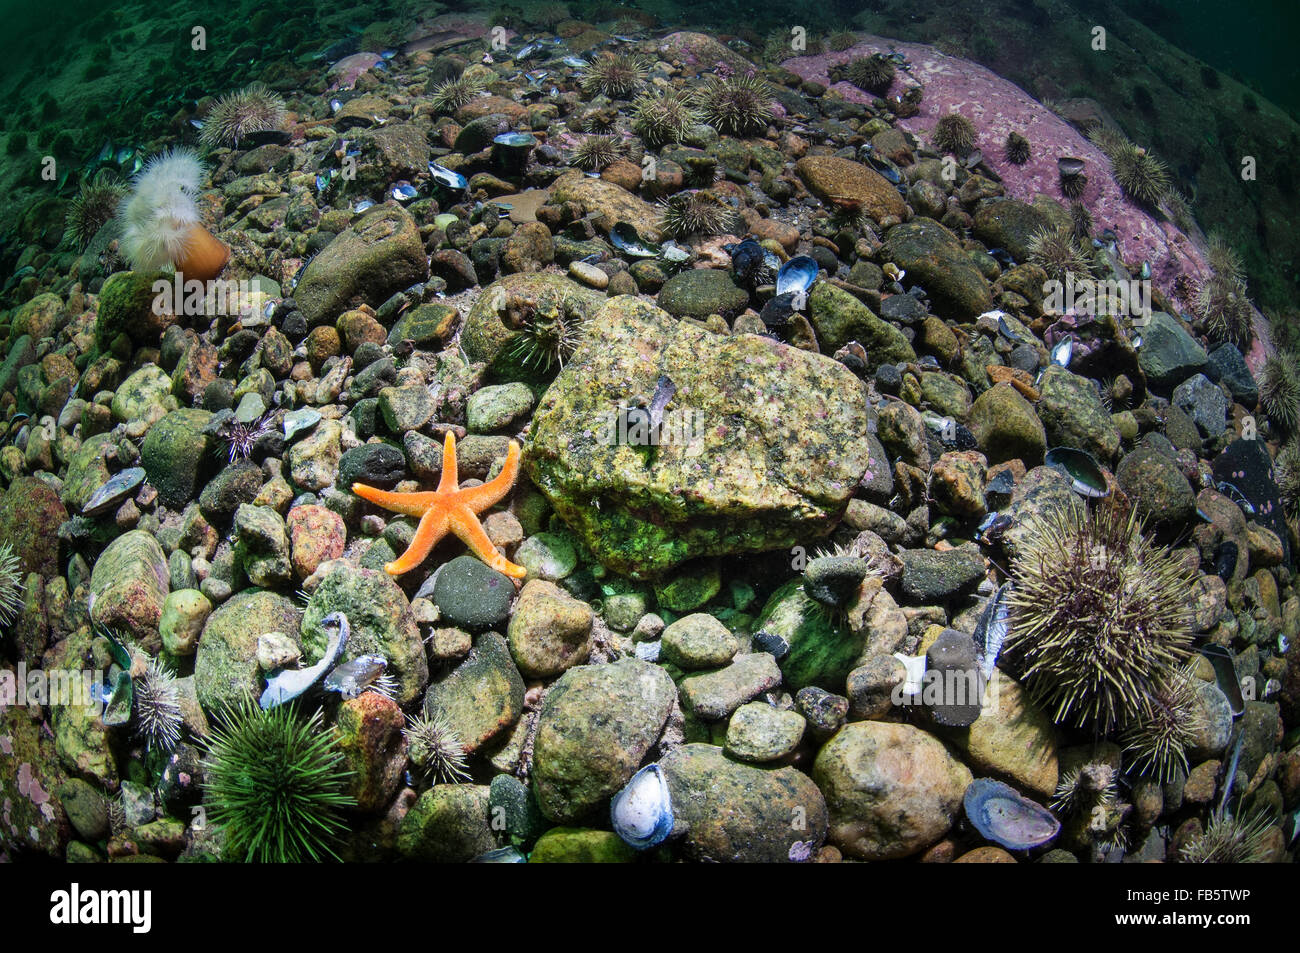 Blood Sea Star underwater feeding on a marine sponge in the Gulf of the St. Lawrence River Stock Photo